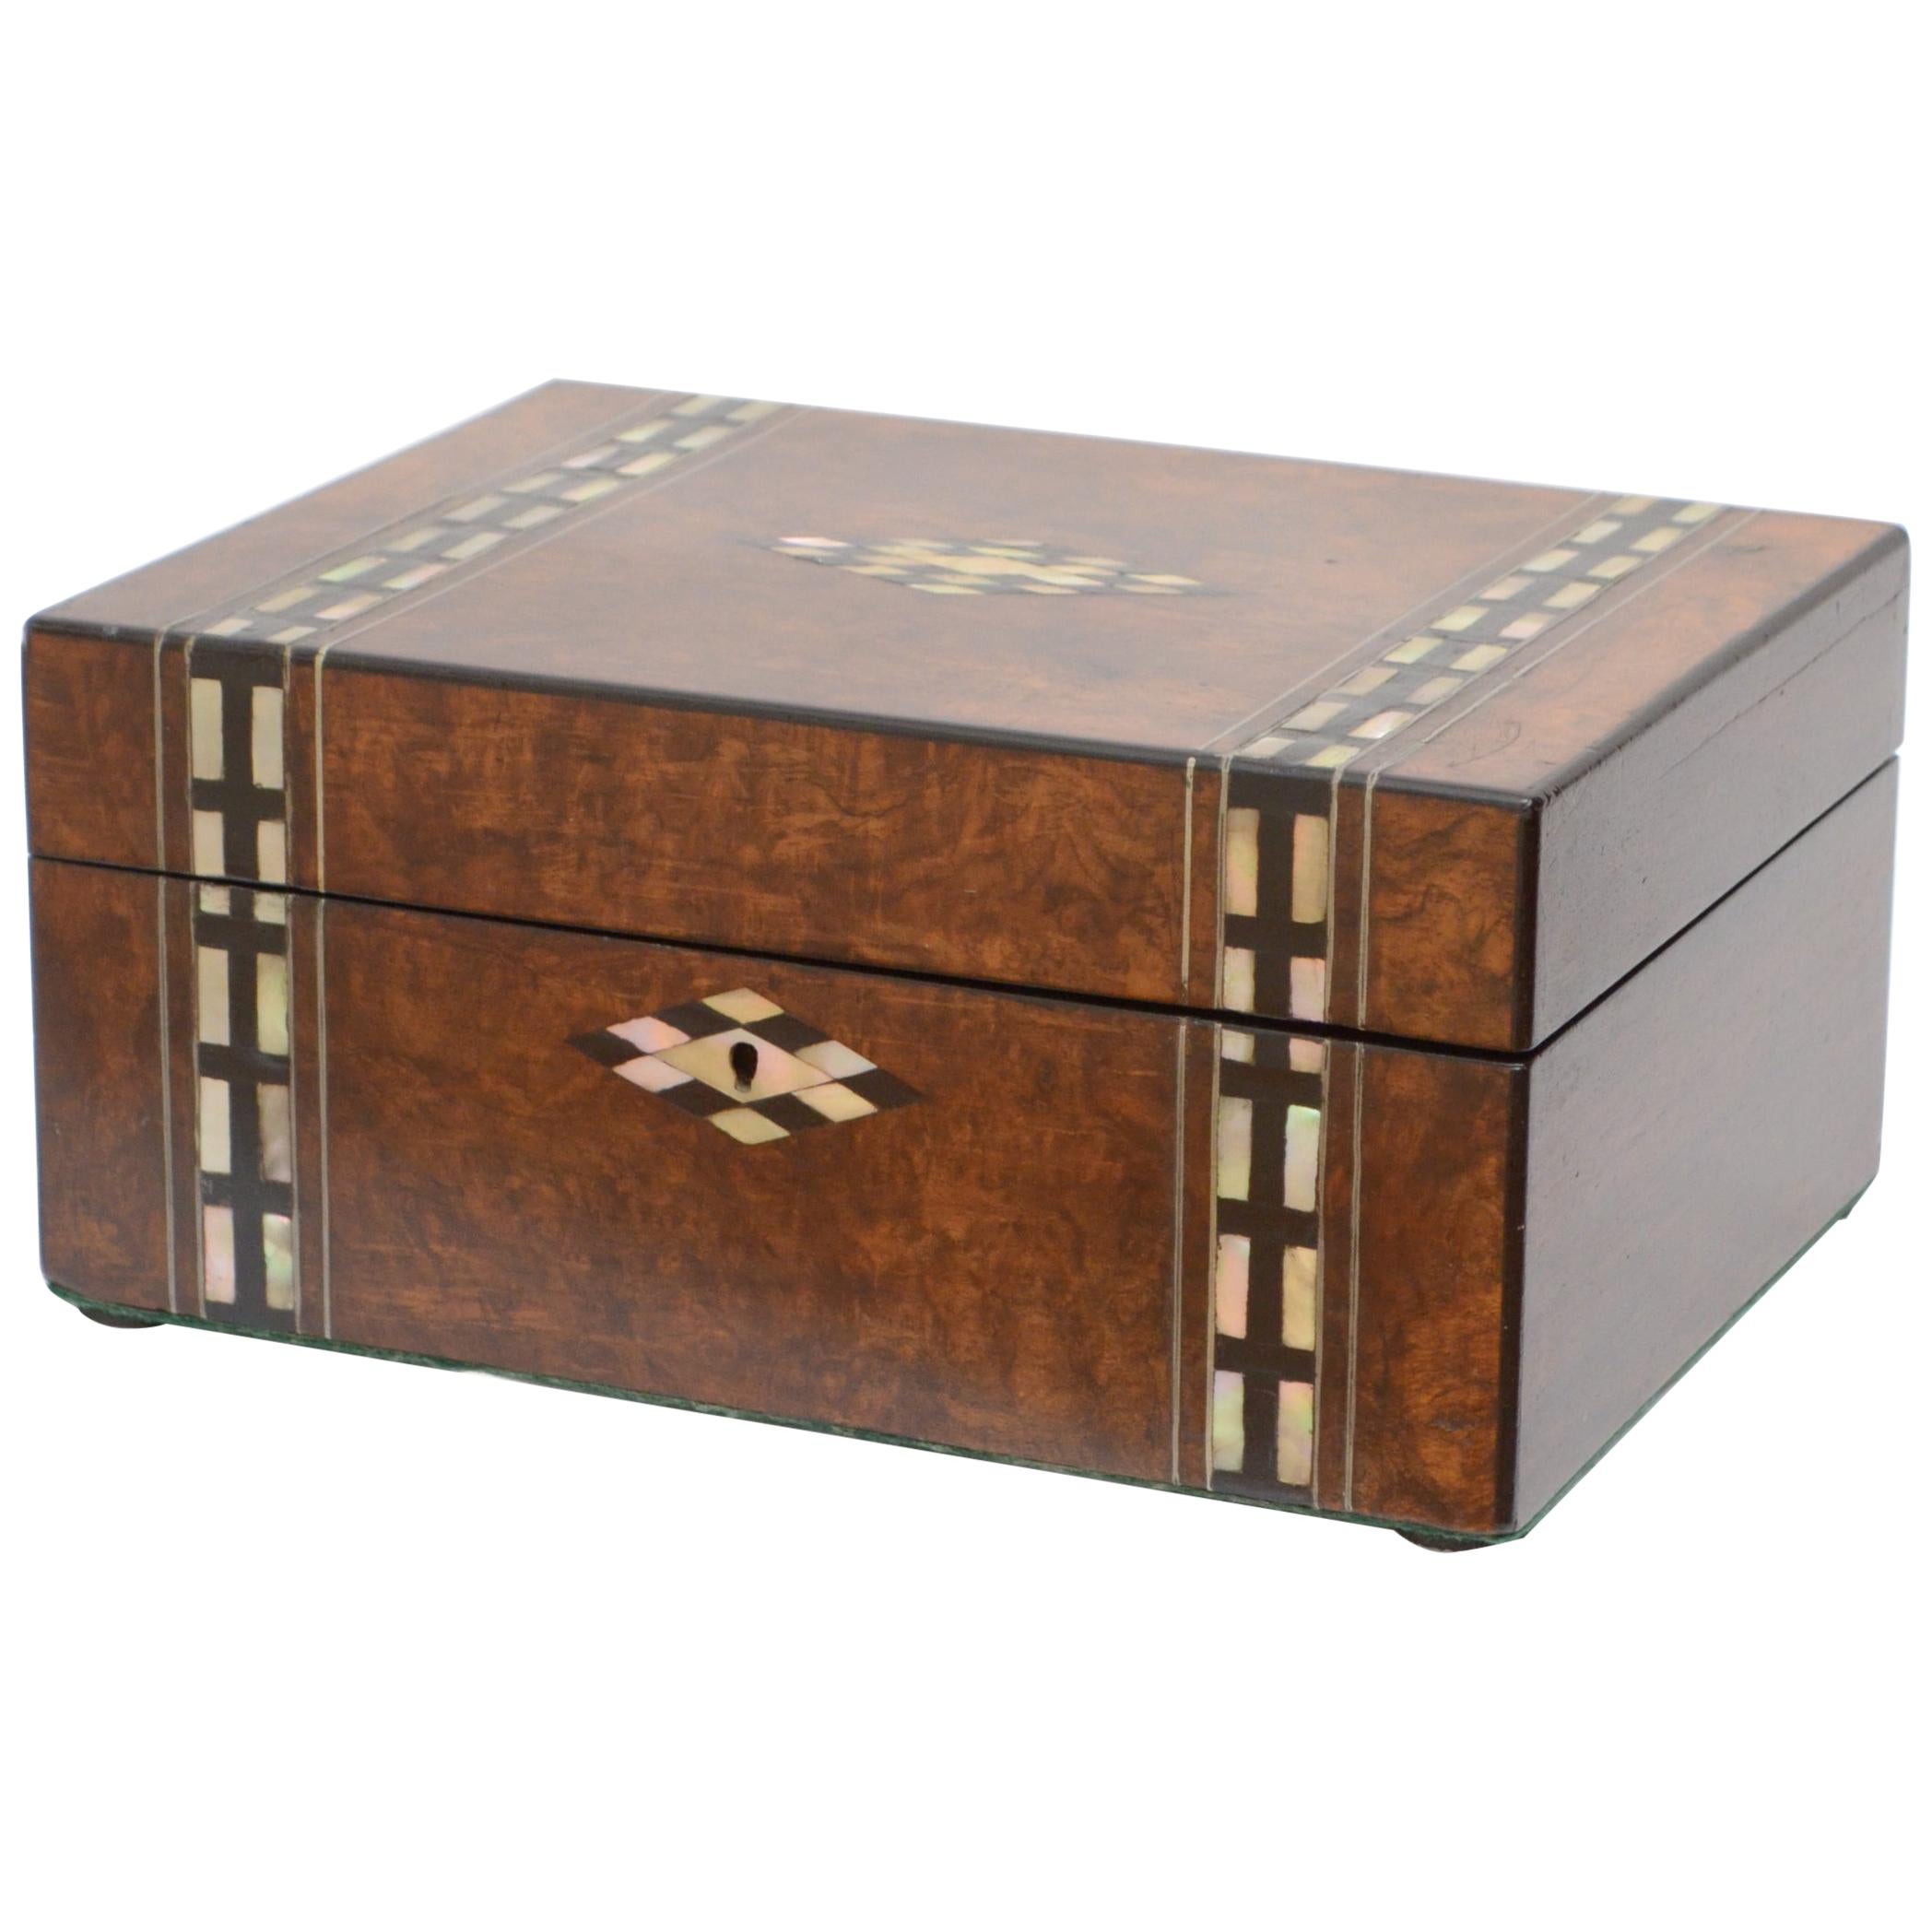 Victorian Walnut and Inlaid Jewelry Box Sewing Box with Tray